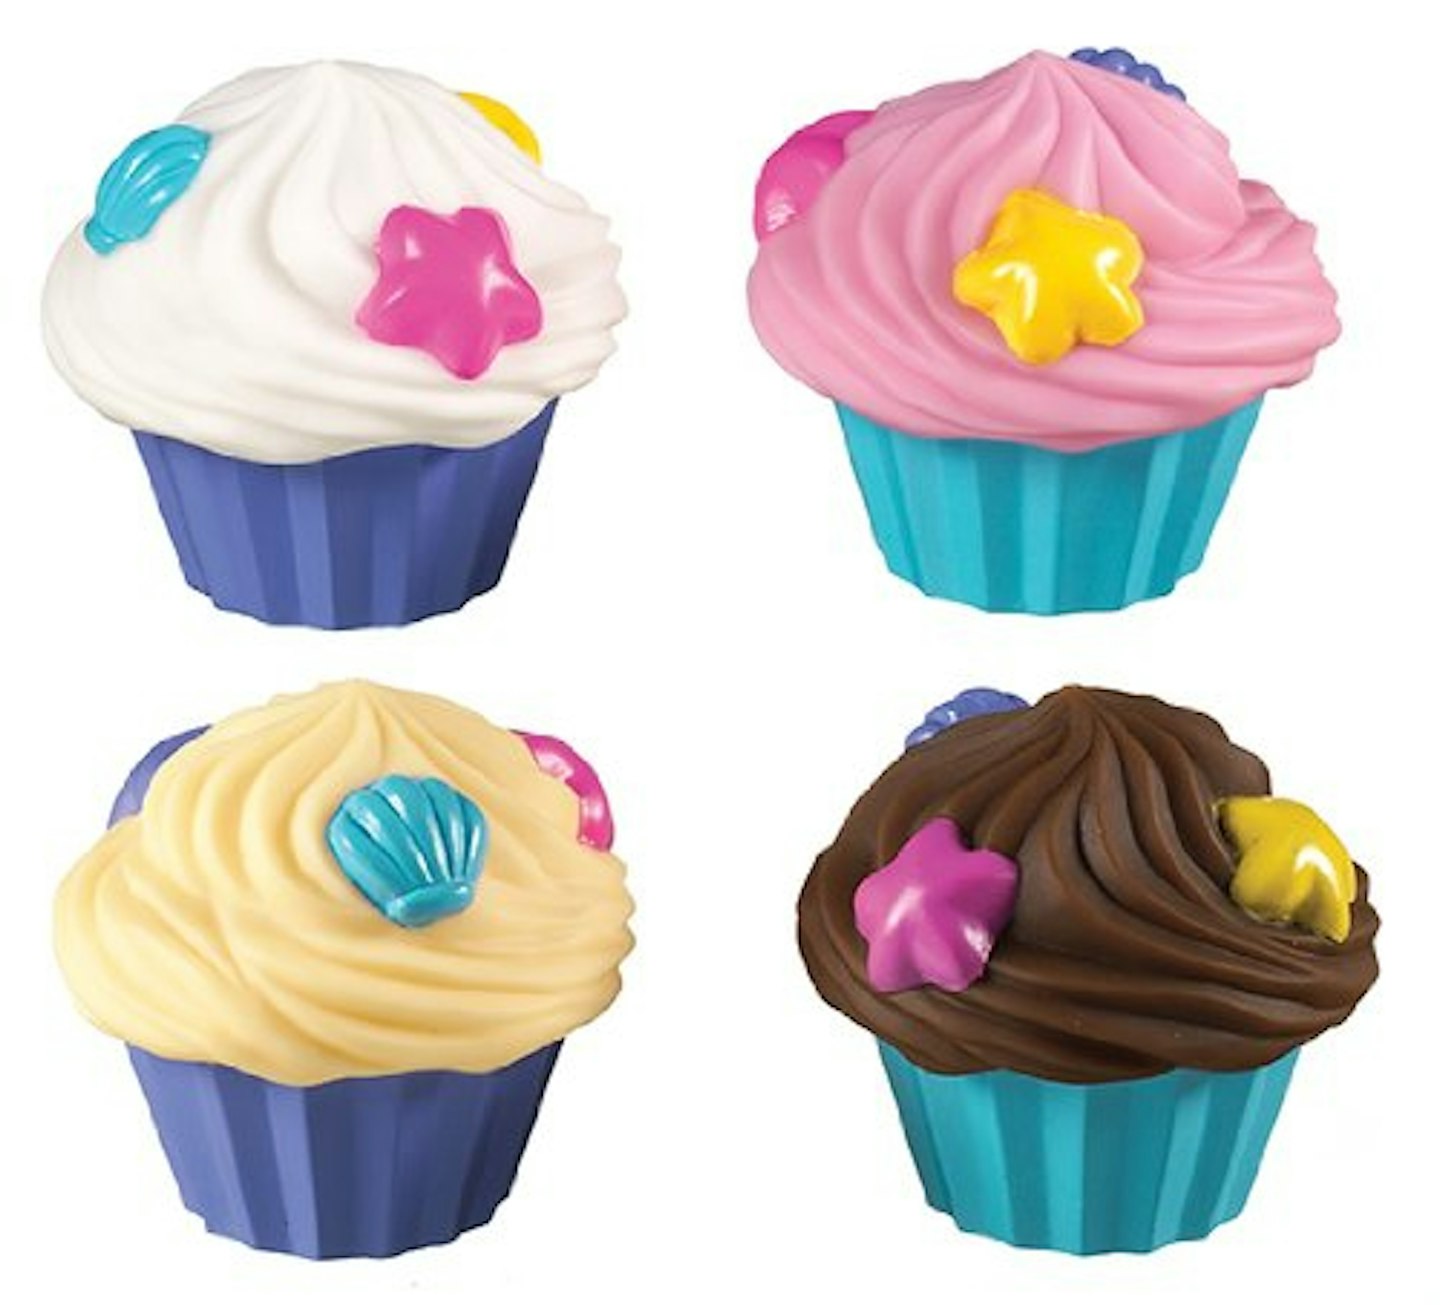 colourful toy cupcakes